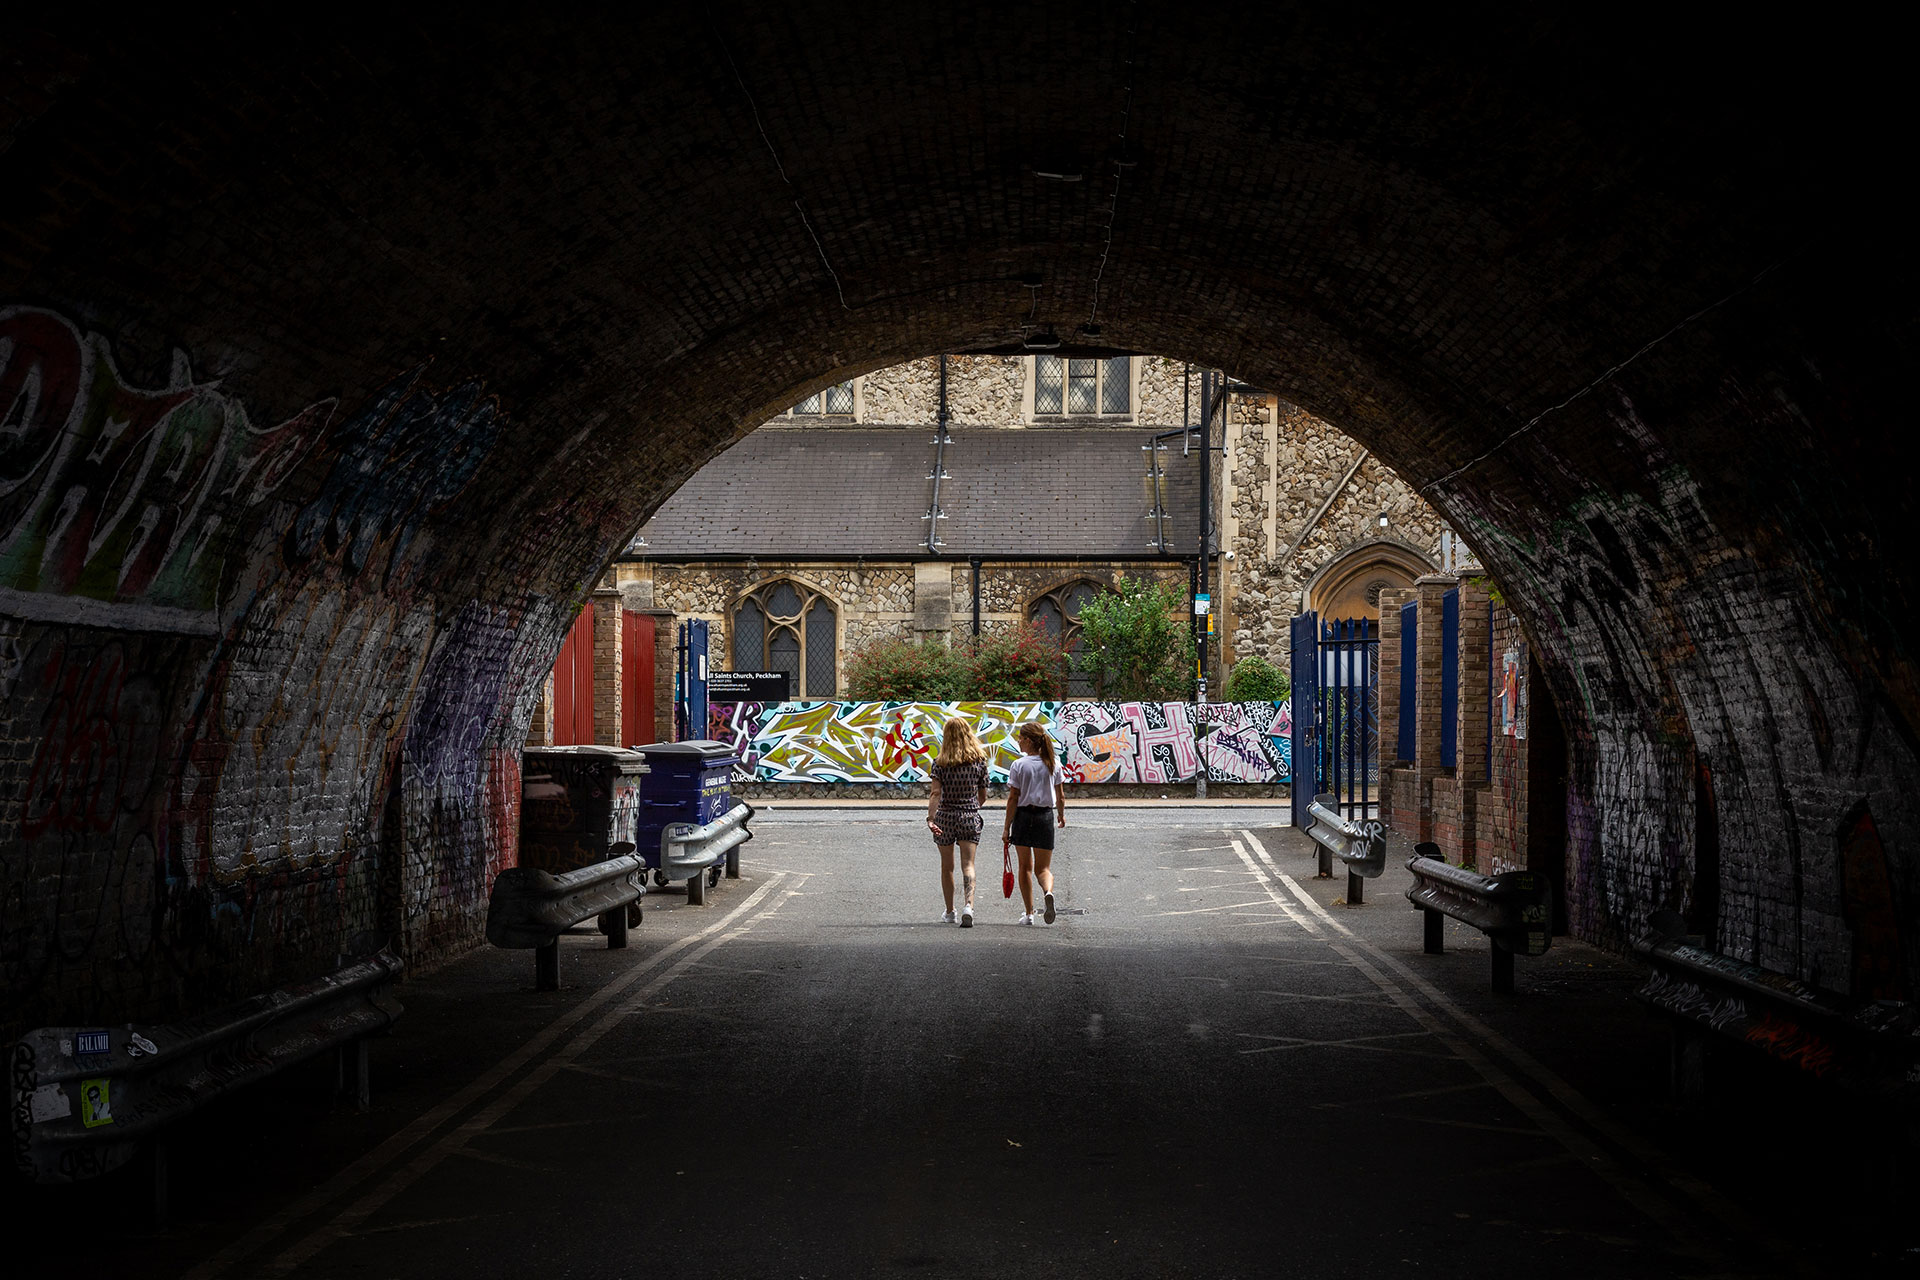 Two people walking through an underpass in Peckham